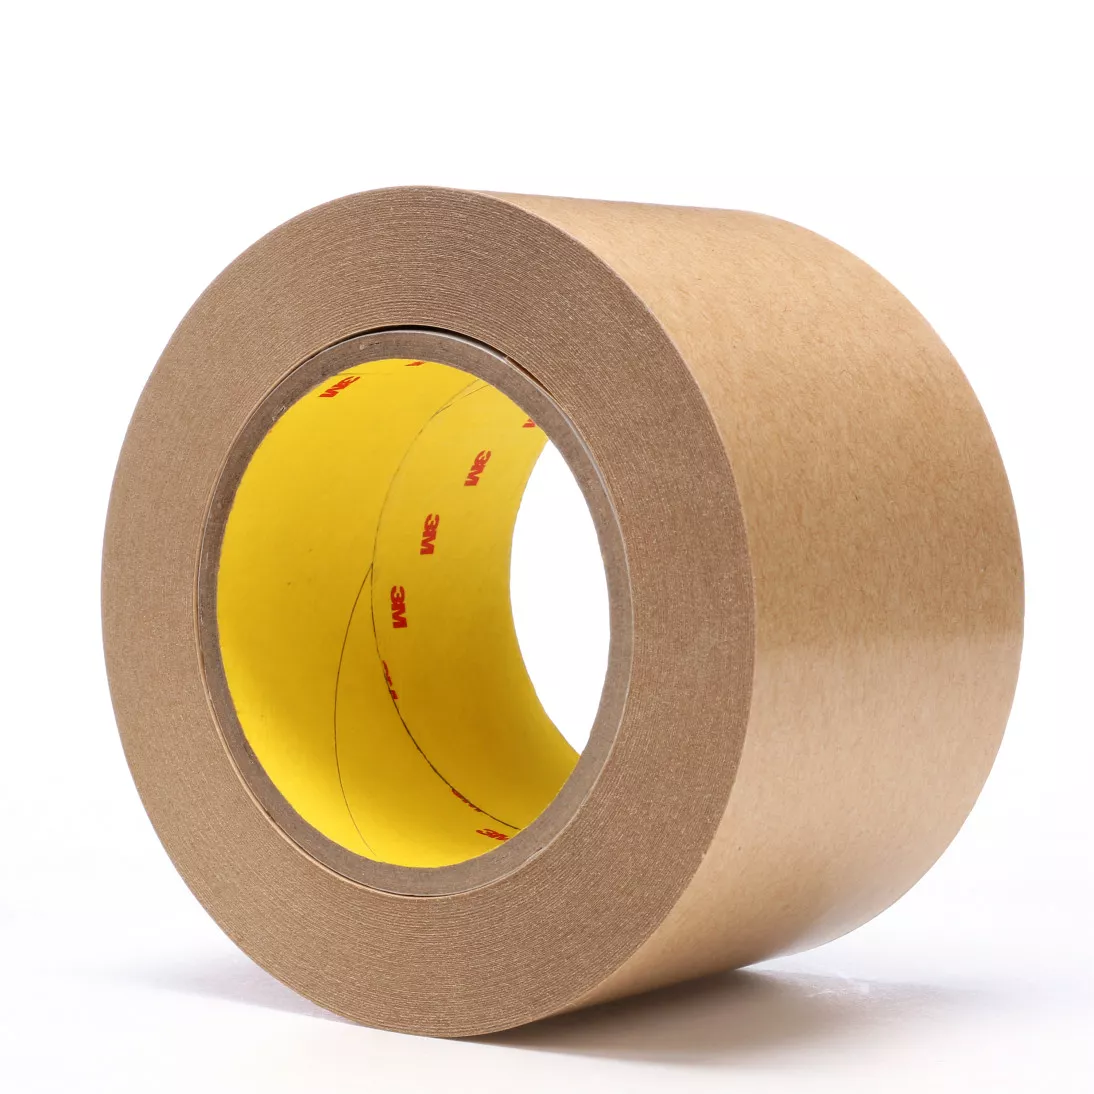 3M™ Adhesive Transfer Tape 465, Clear, 3 in x 60 yd, 2 mil, 12 rolls per
case